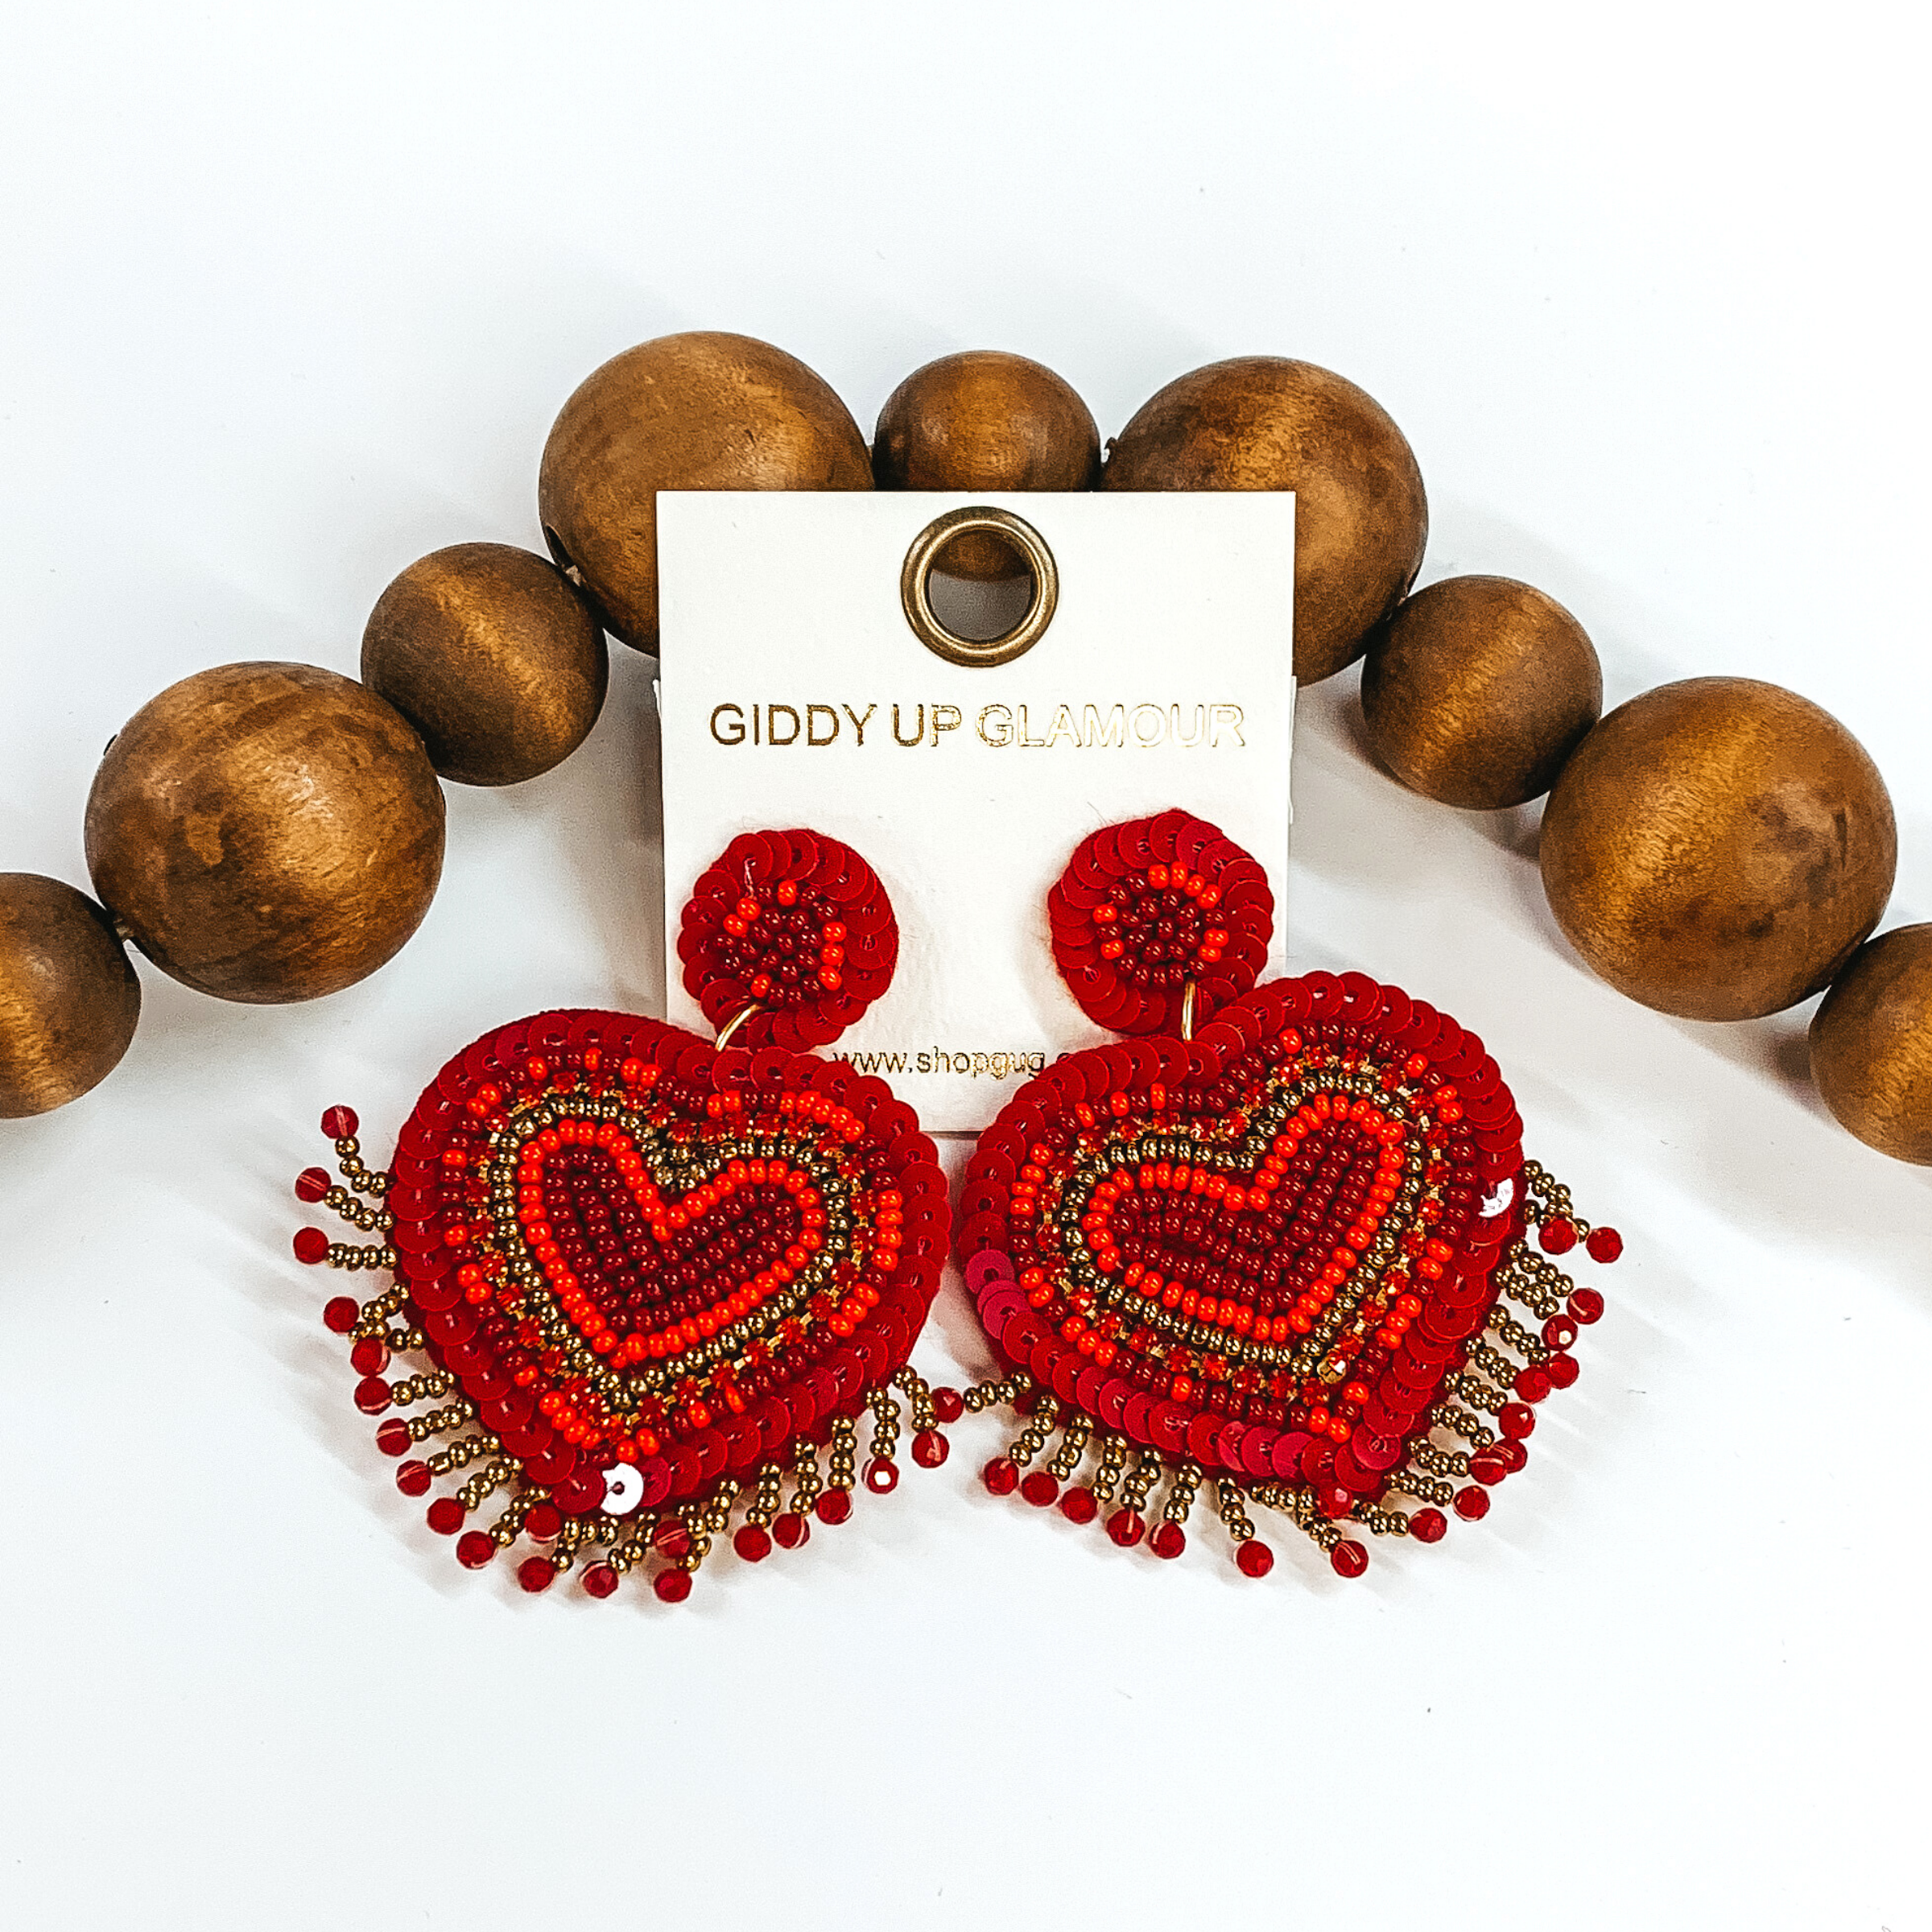 Sequin and beaded heart and dangle earrings with gold beaded fringe. It includes red, dark red, and gold beads and light pink sequins. These earrings are laying in front of dark brown beads on a white background.  